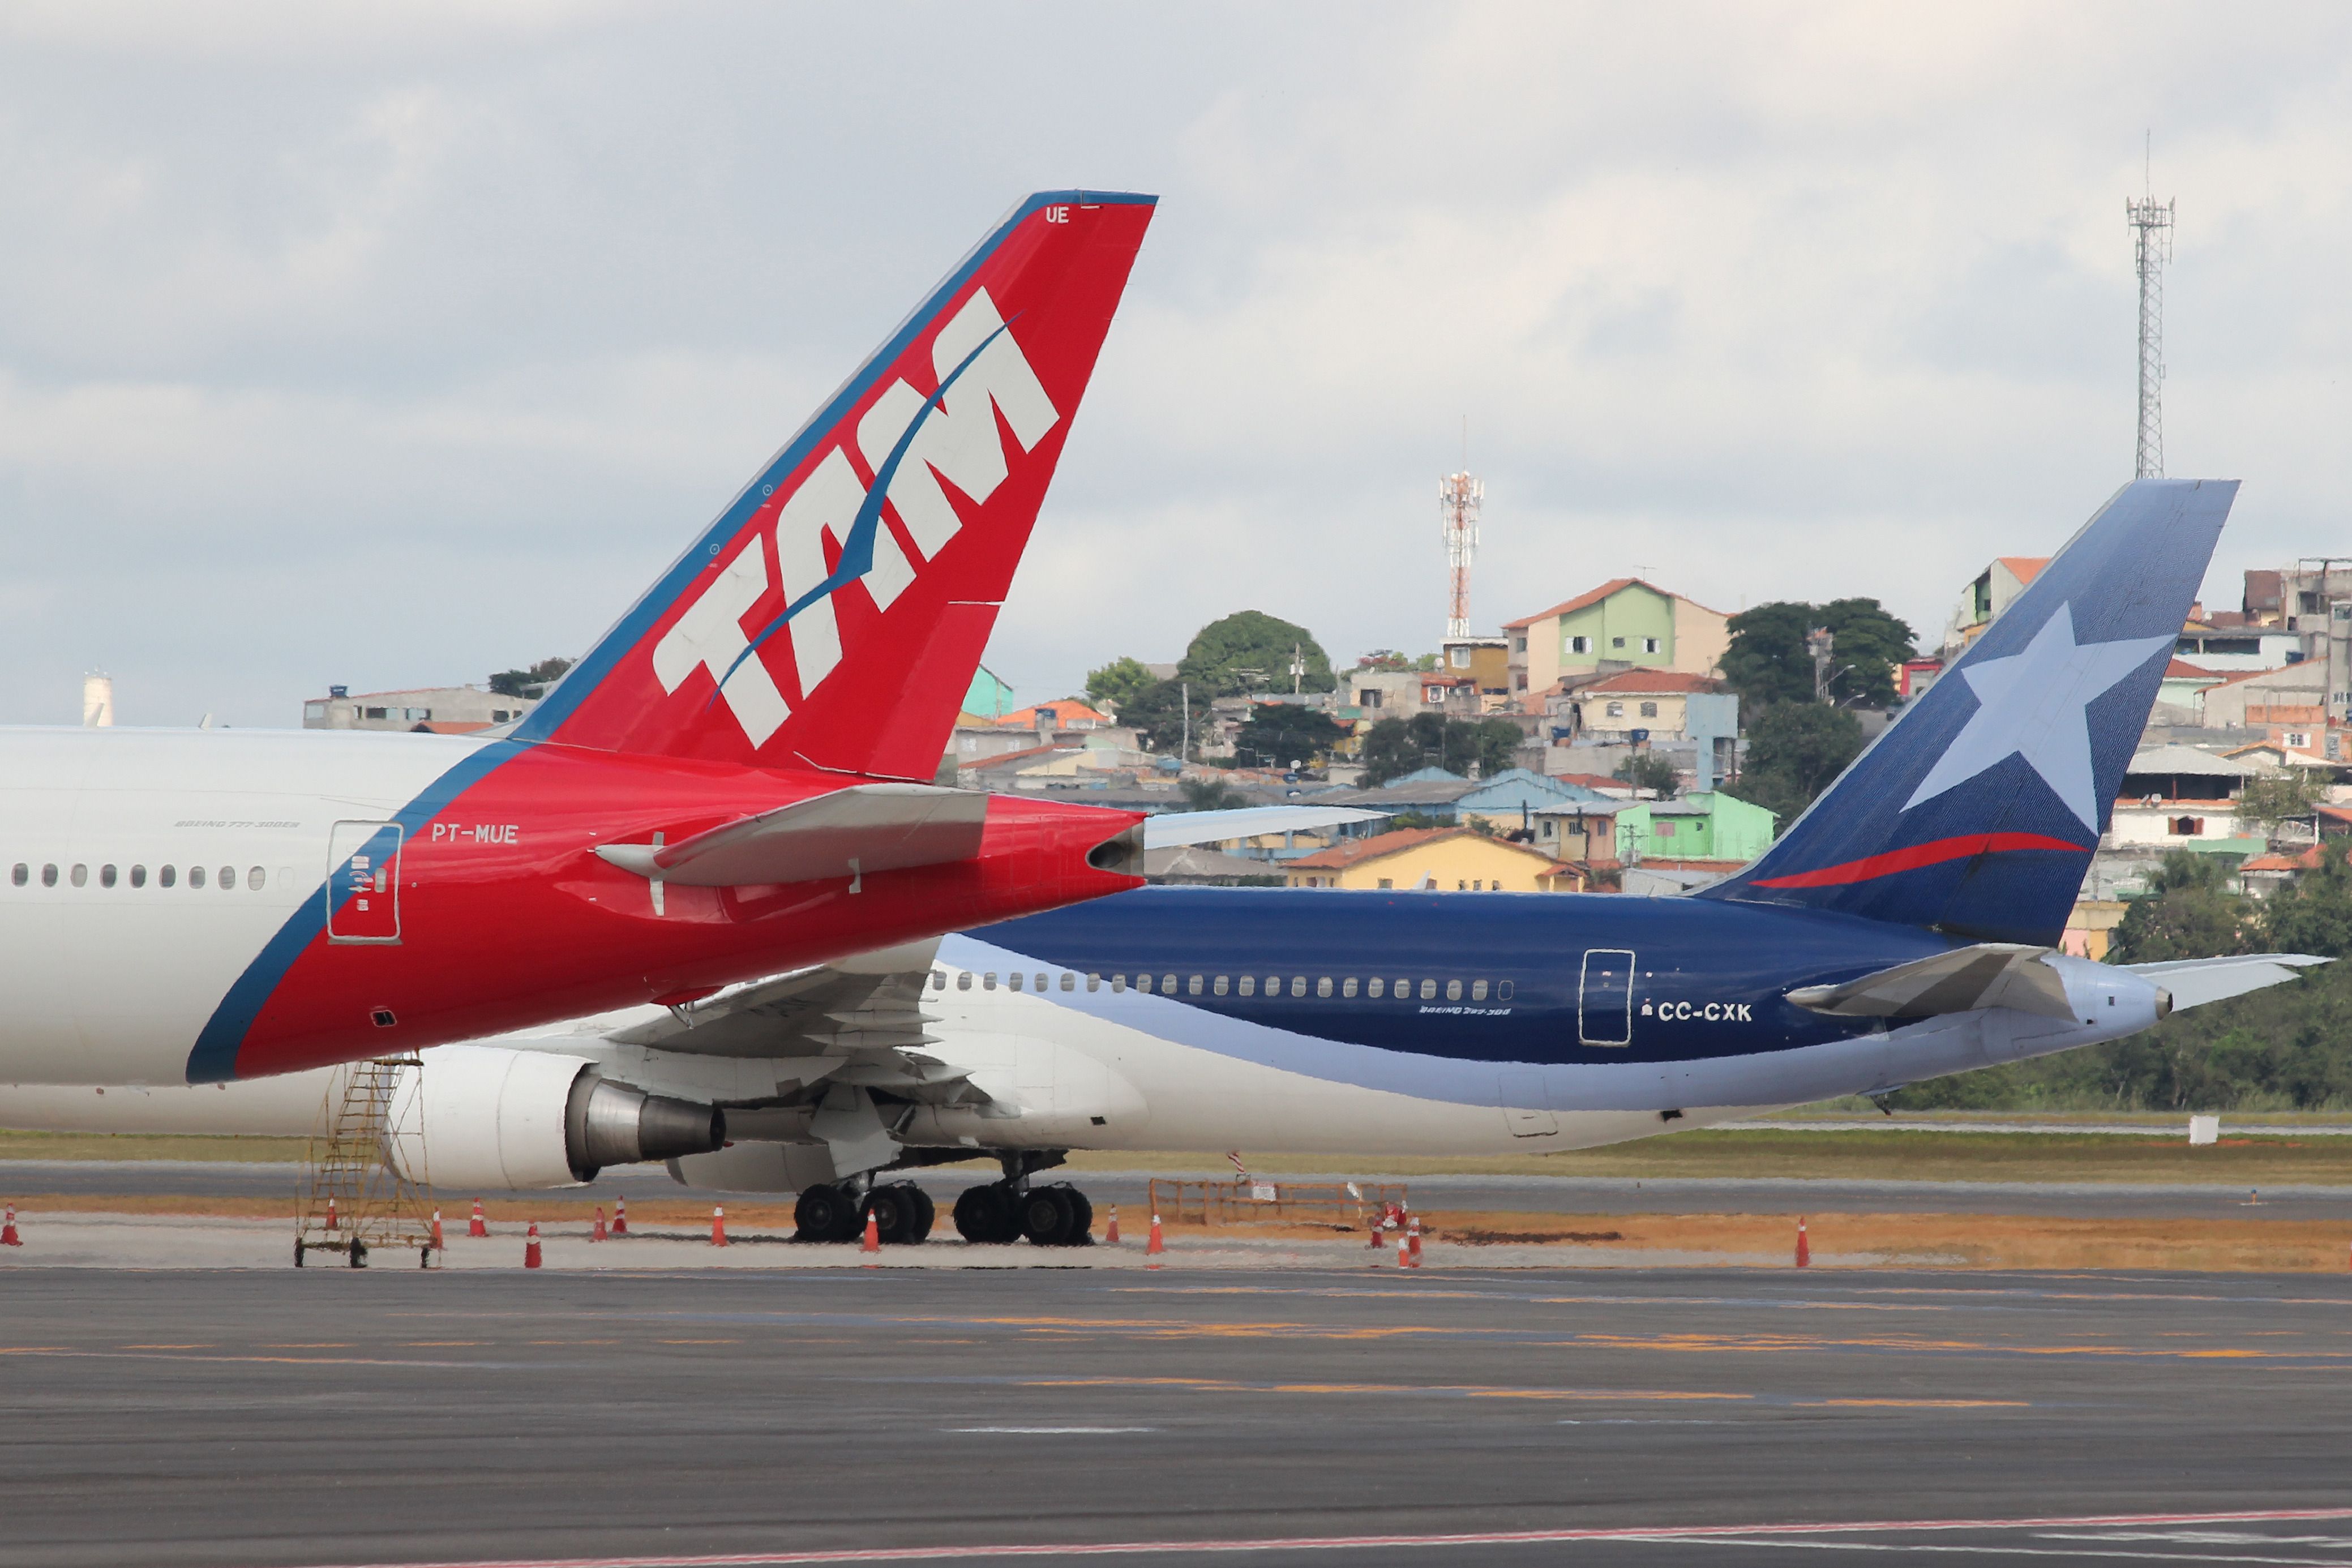 Aircraft from LAN and TAM parked side by side in Sao Paulo.